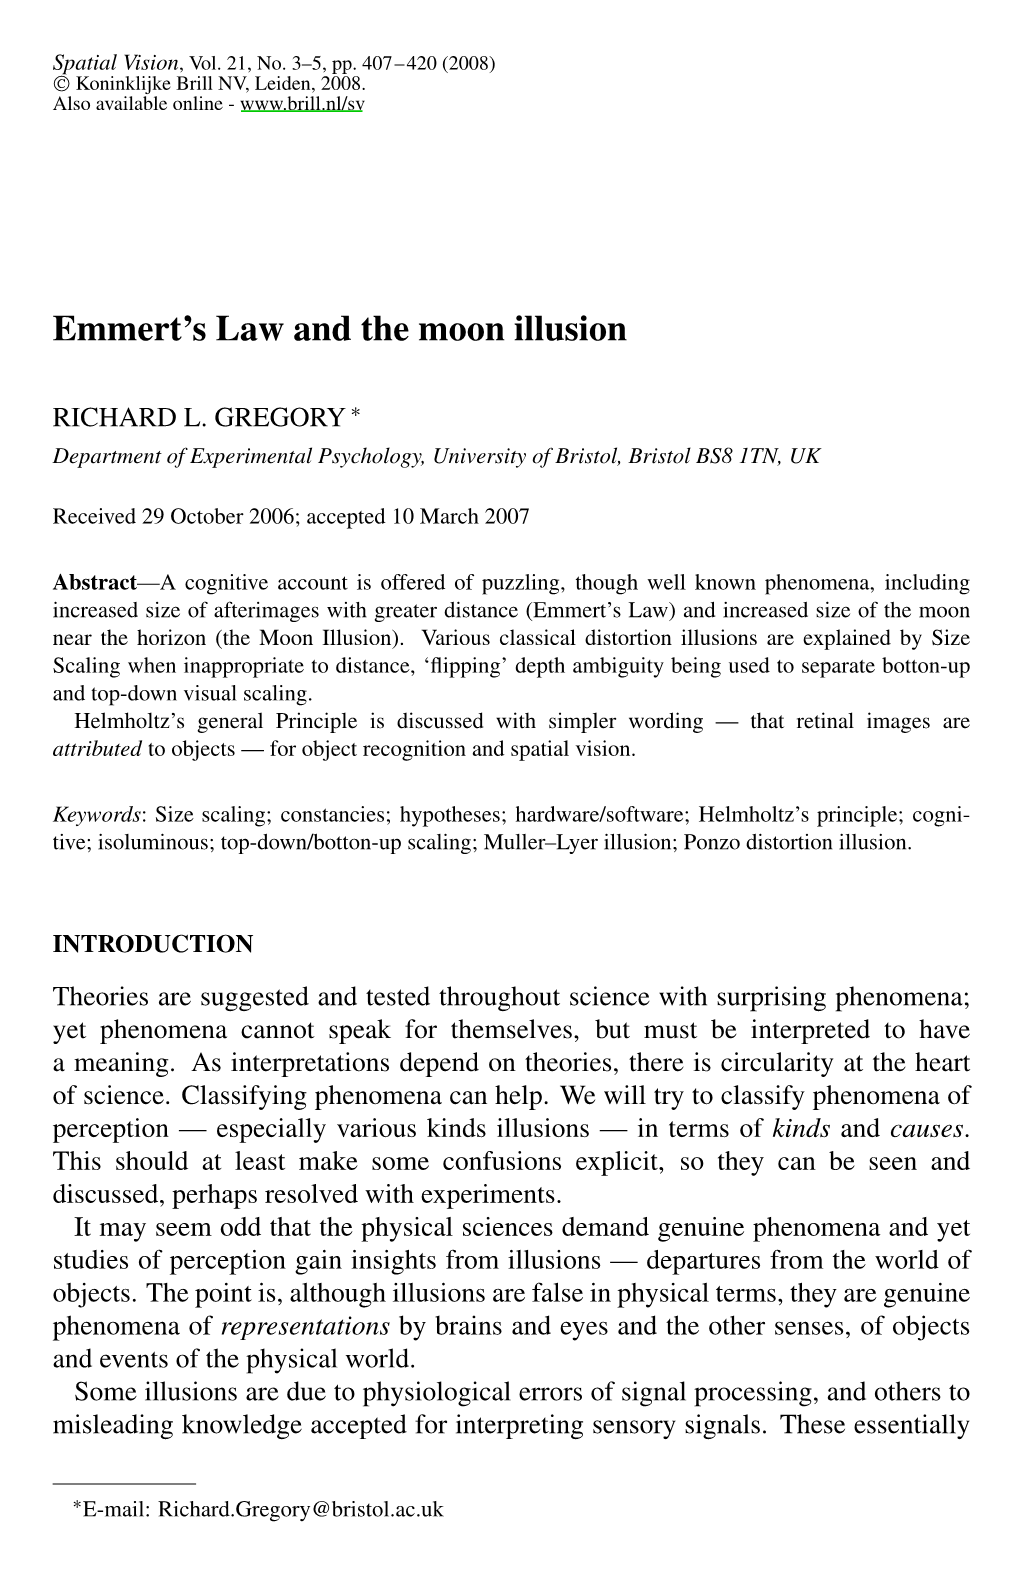 Emmert's Law and the Moon Illusion